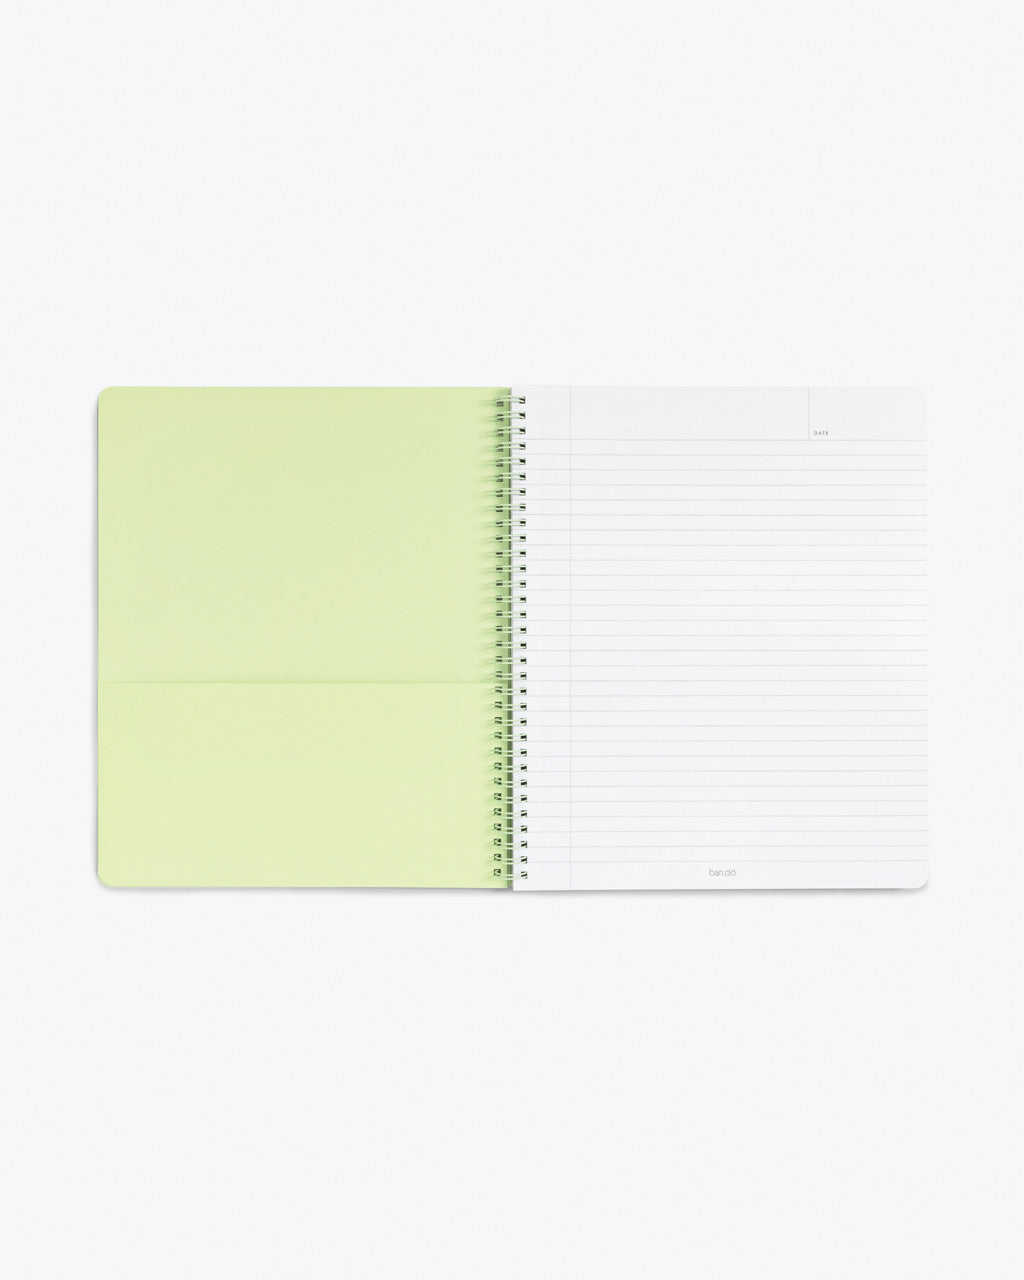 https://cdn.shopify.com/s/files/1/0787/5255/products/bando-il-rough-draft-large-notebook-junk-drawer-tone-02.jpg?v=1613523188